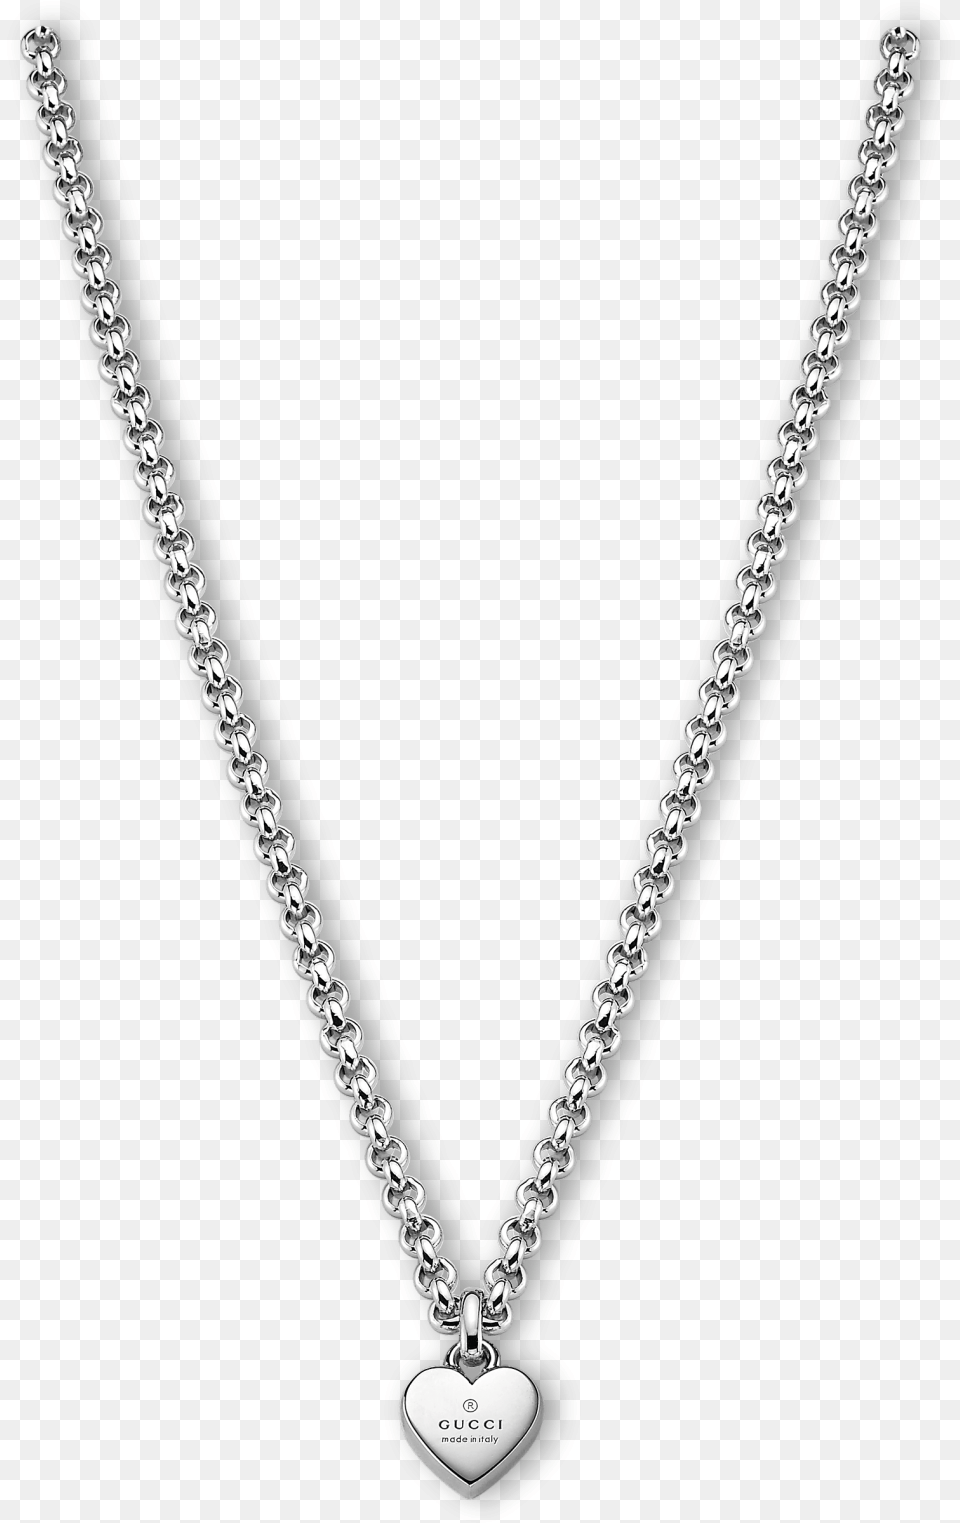 Gucci Necklace Gucci Necklace Transparent Background, Accessories, Diamond, Gemstone, Jewelry Free Png